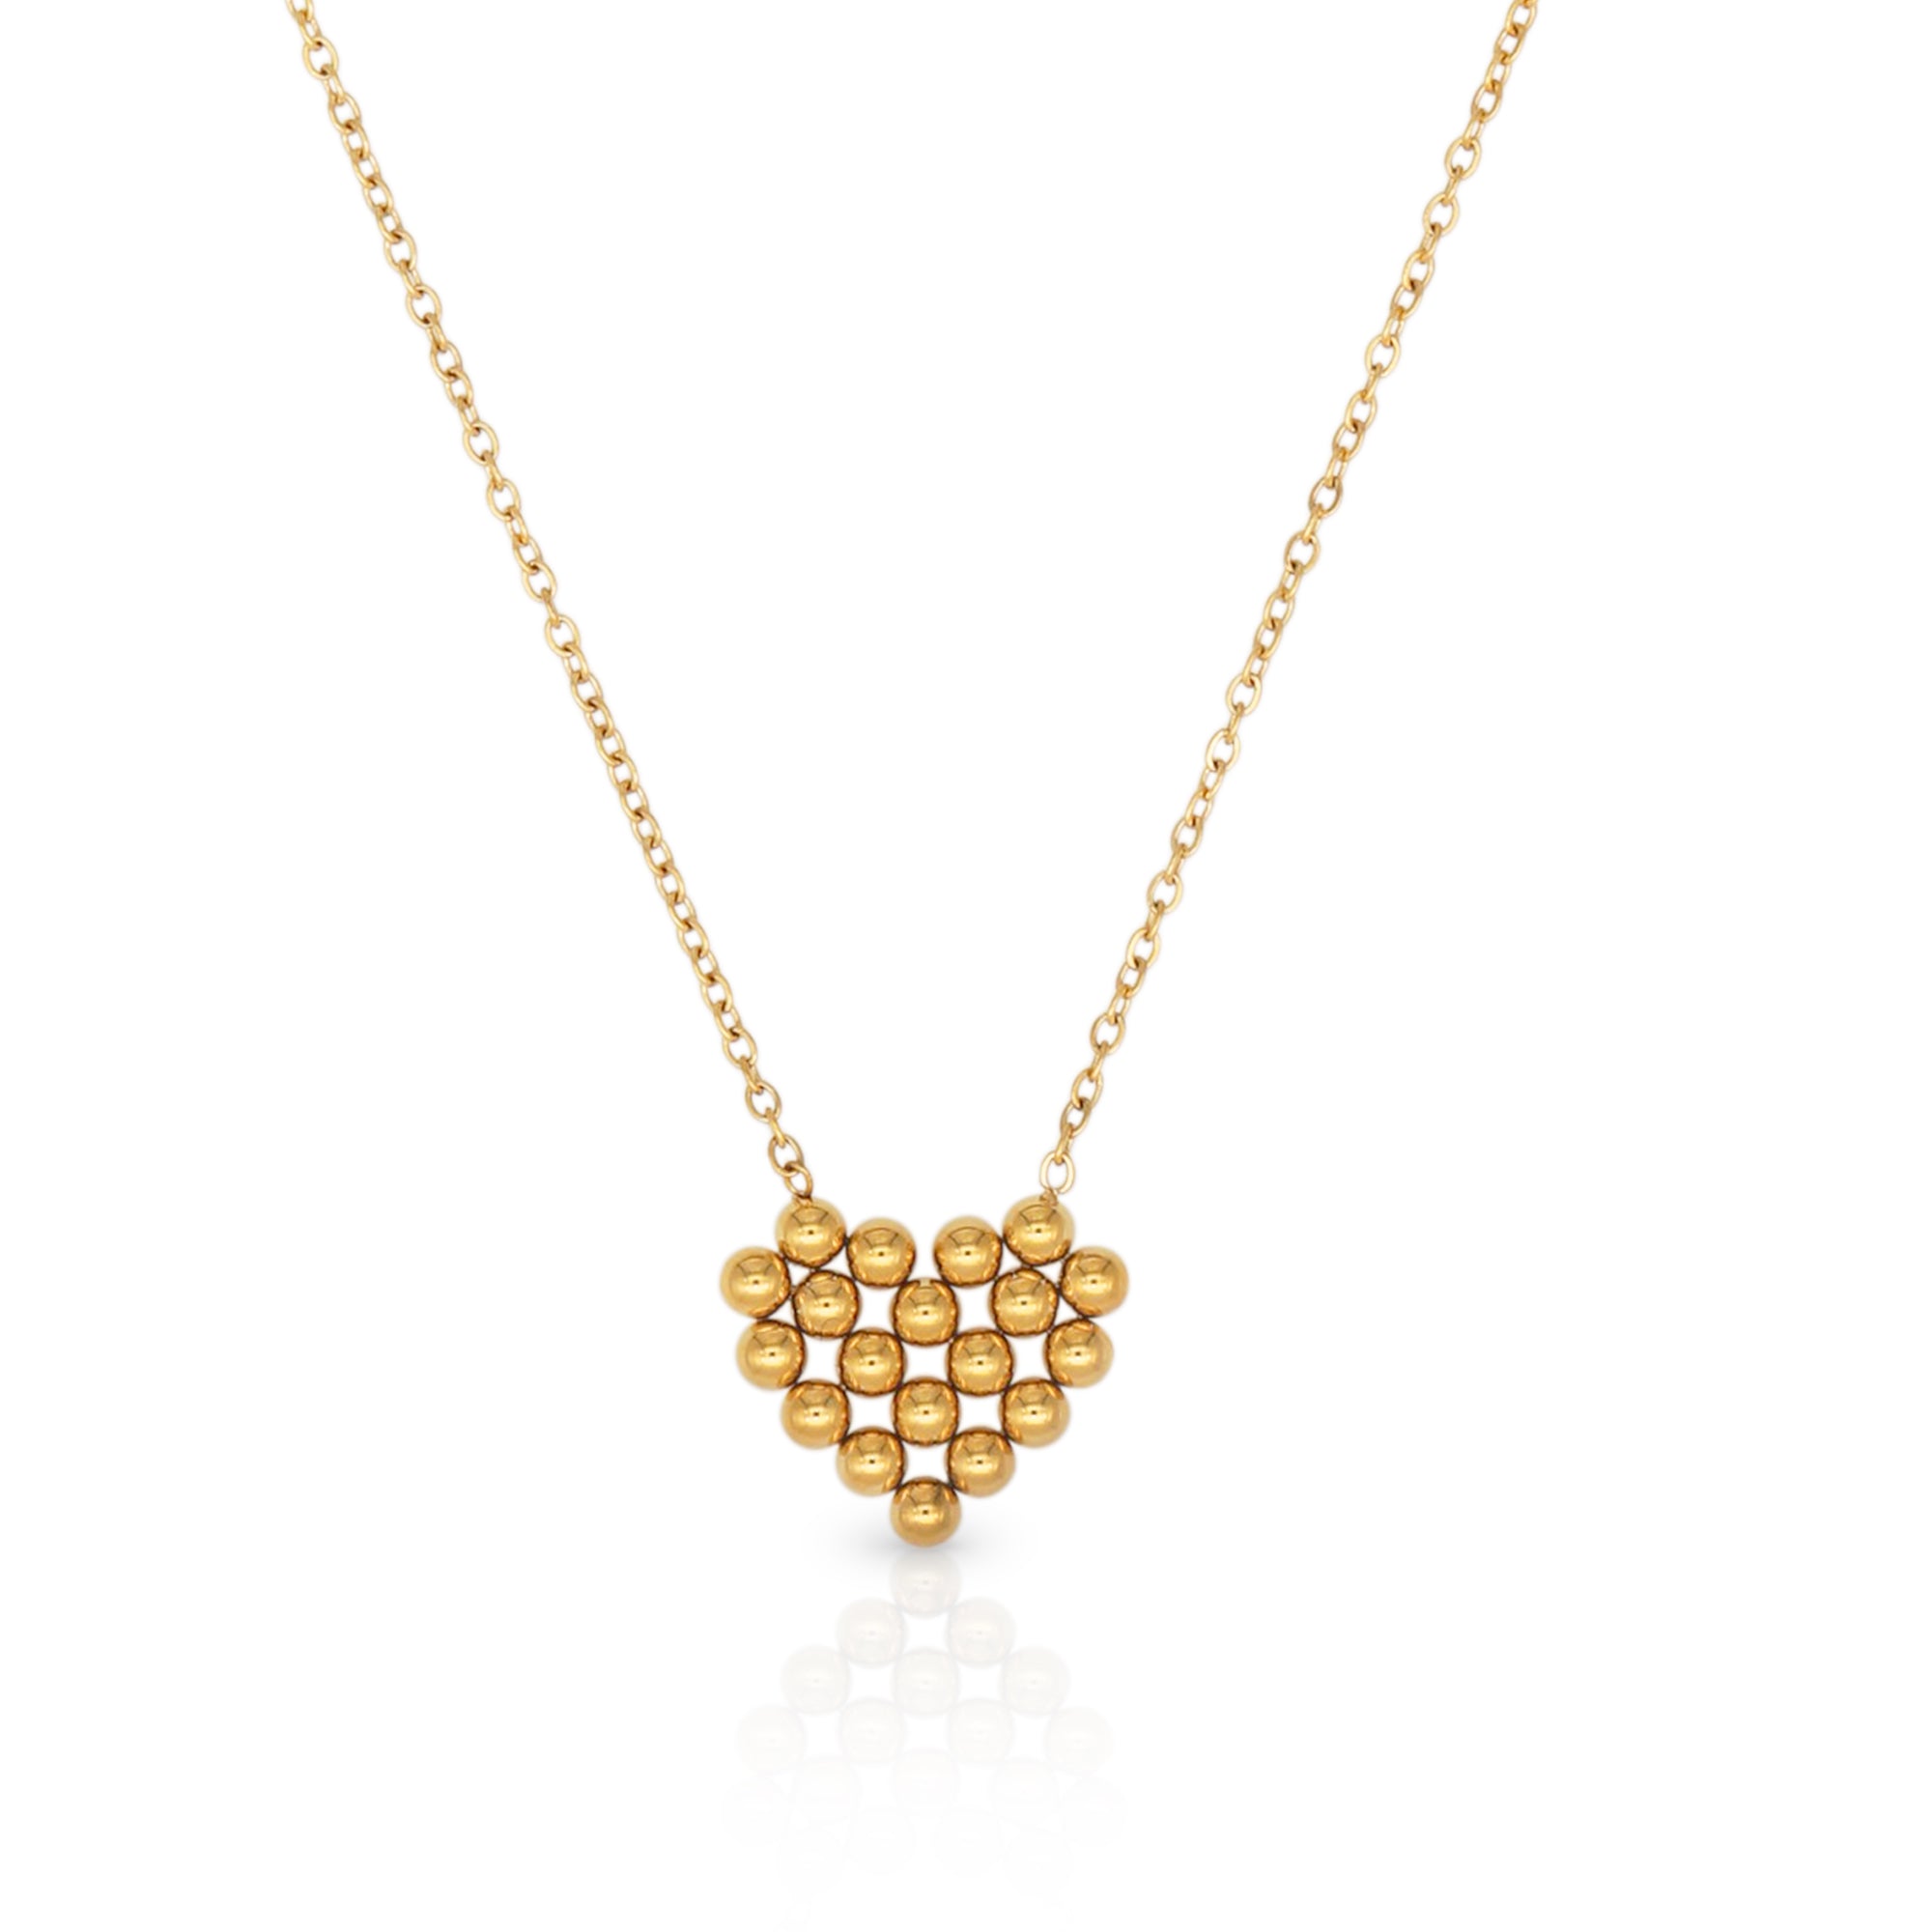 The Bead Heart Gold Necklace